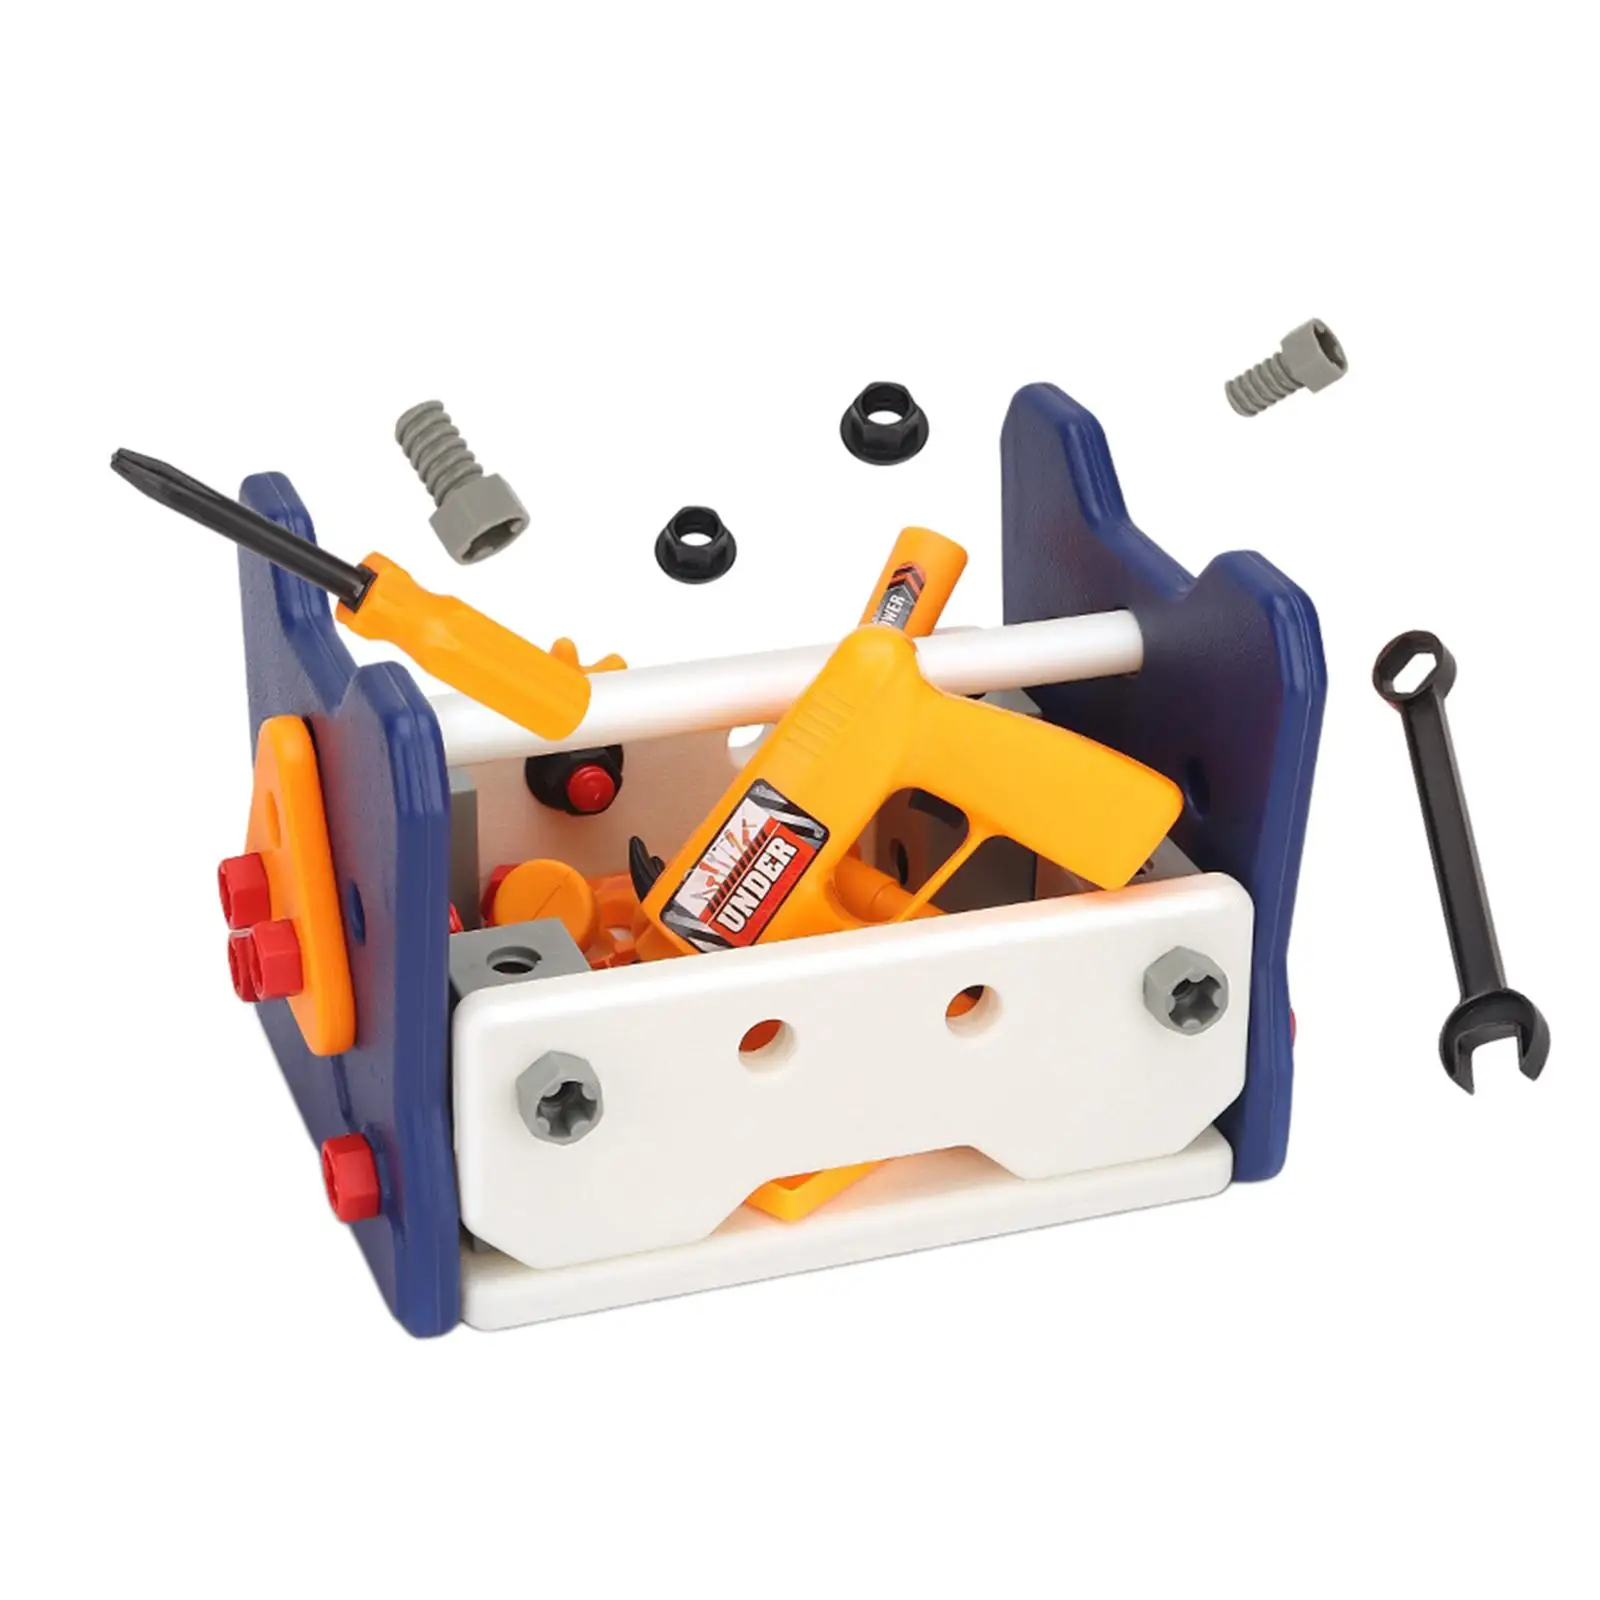 Toolbox Pretend Play Set Nut Disassembly Repair Carpenter Tool Basic Skills Montessori Toy for Preschool Kids Holiday Gifts